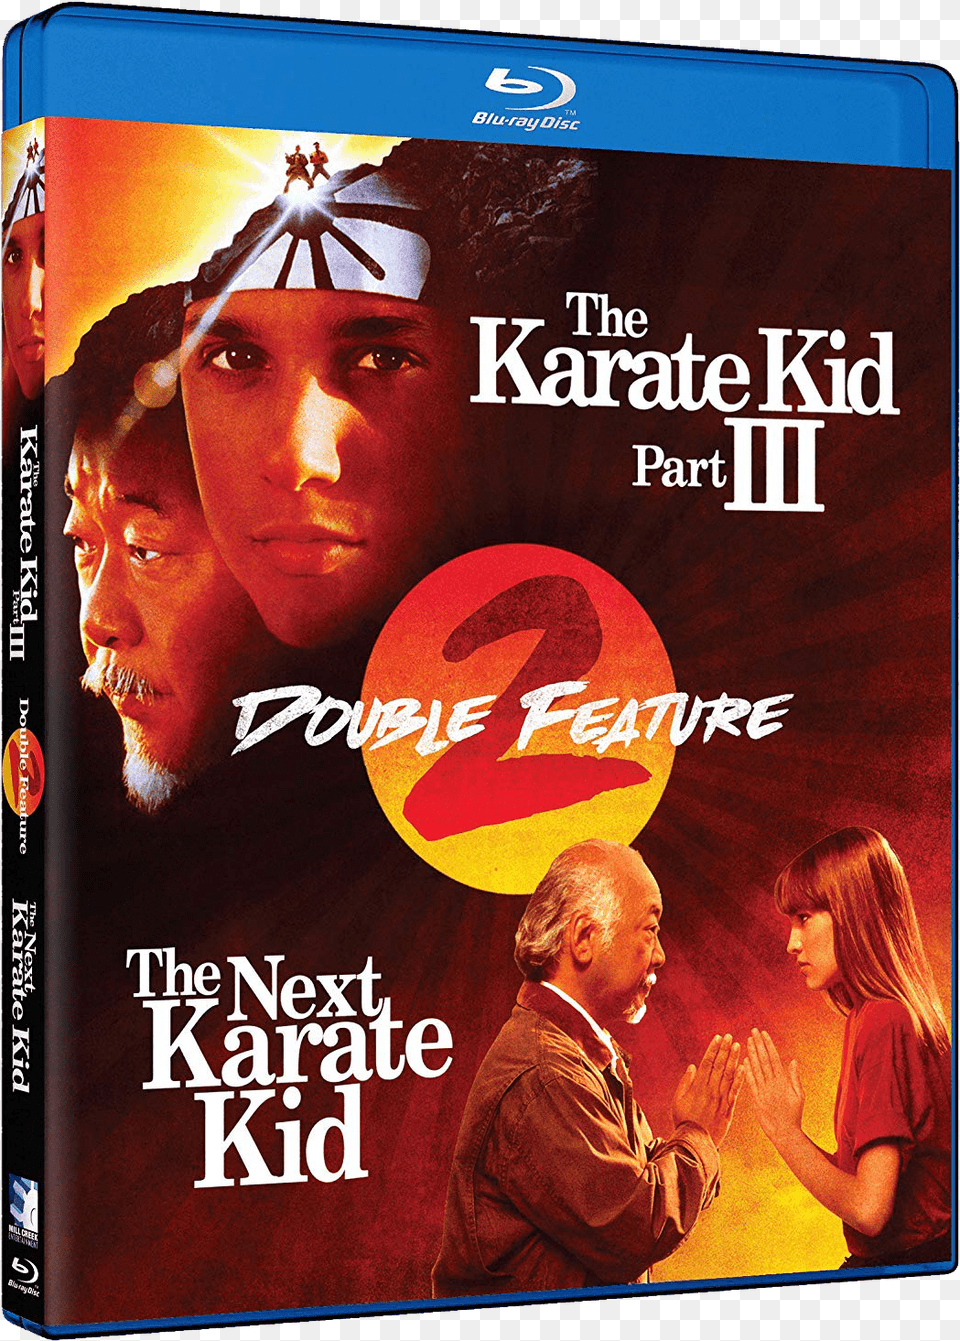 The Karate Kid Iii Amp The Next Karate Kid Double Feature Karate Kid 3 Blu Ray, Publication, Book, Novel, Person Png Image